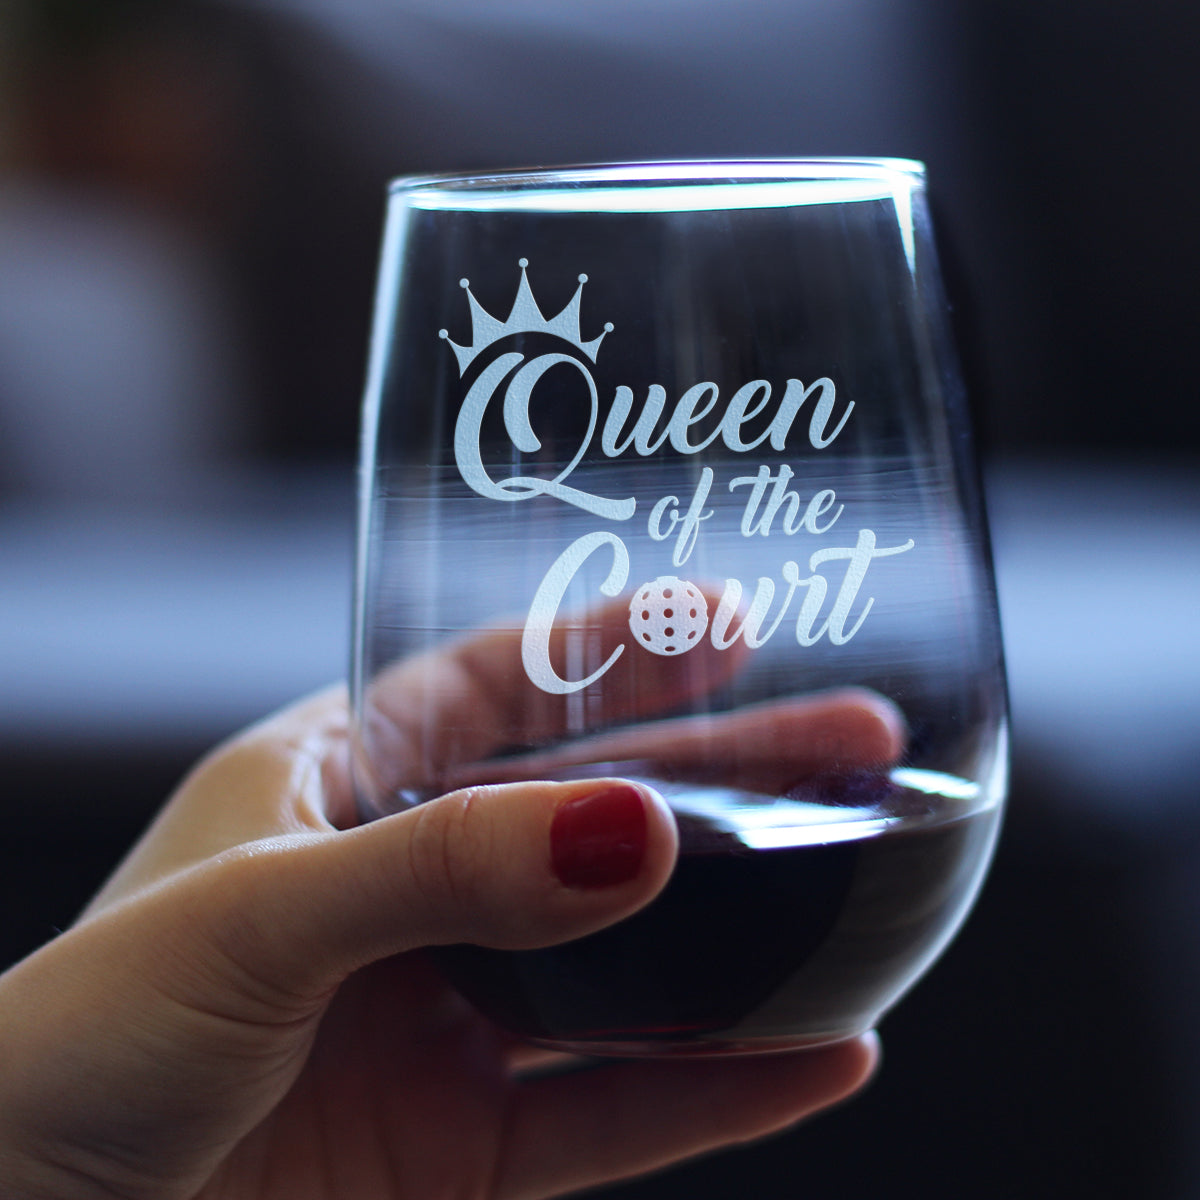 Queen of the Court - Stemless Wine Glass - Funny Pickleball Themed Decor and Gifts - Large 17 Oz Glasses